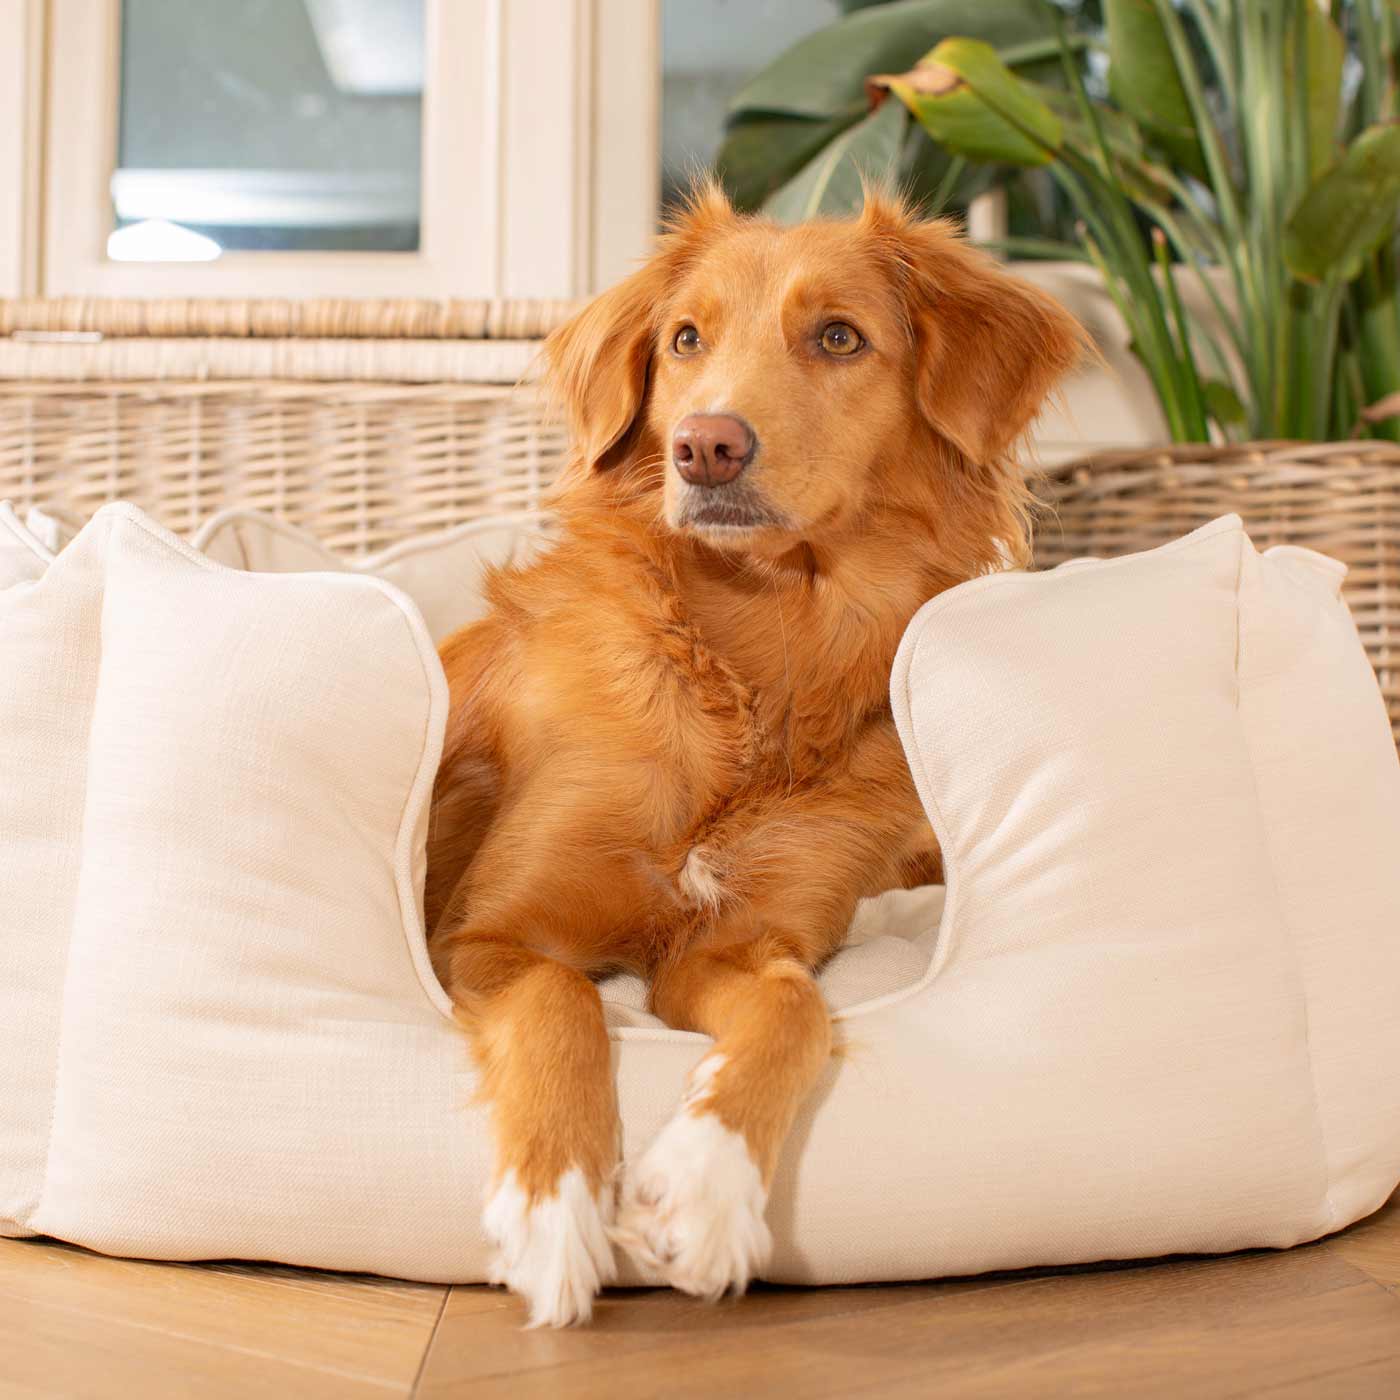 Discover Our Luxurious High Wall Bed For Dogs, Featuring inner pillow with plush teddy fleece on one side To Craft The Perfect Dogs Bed In Stunning Savanna Bone! Available To Personalize Now at Lords & Labradors US